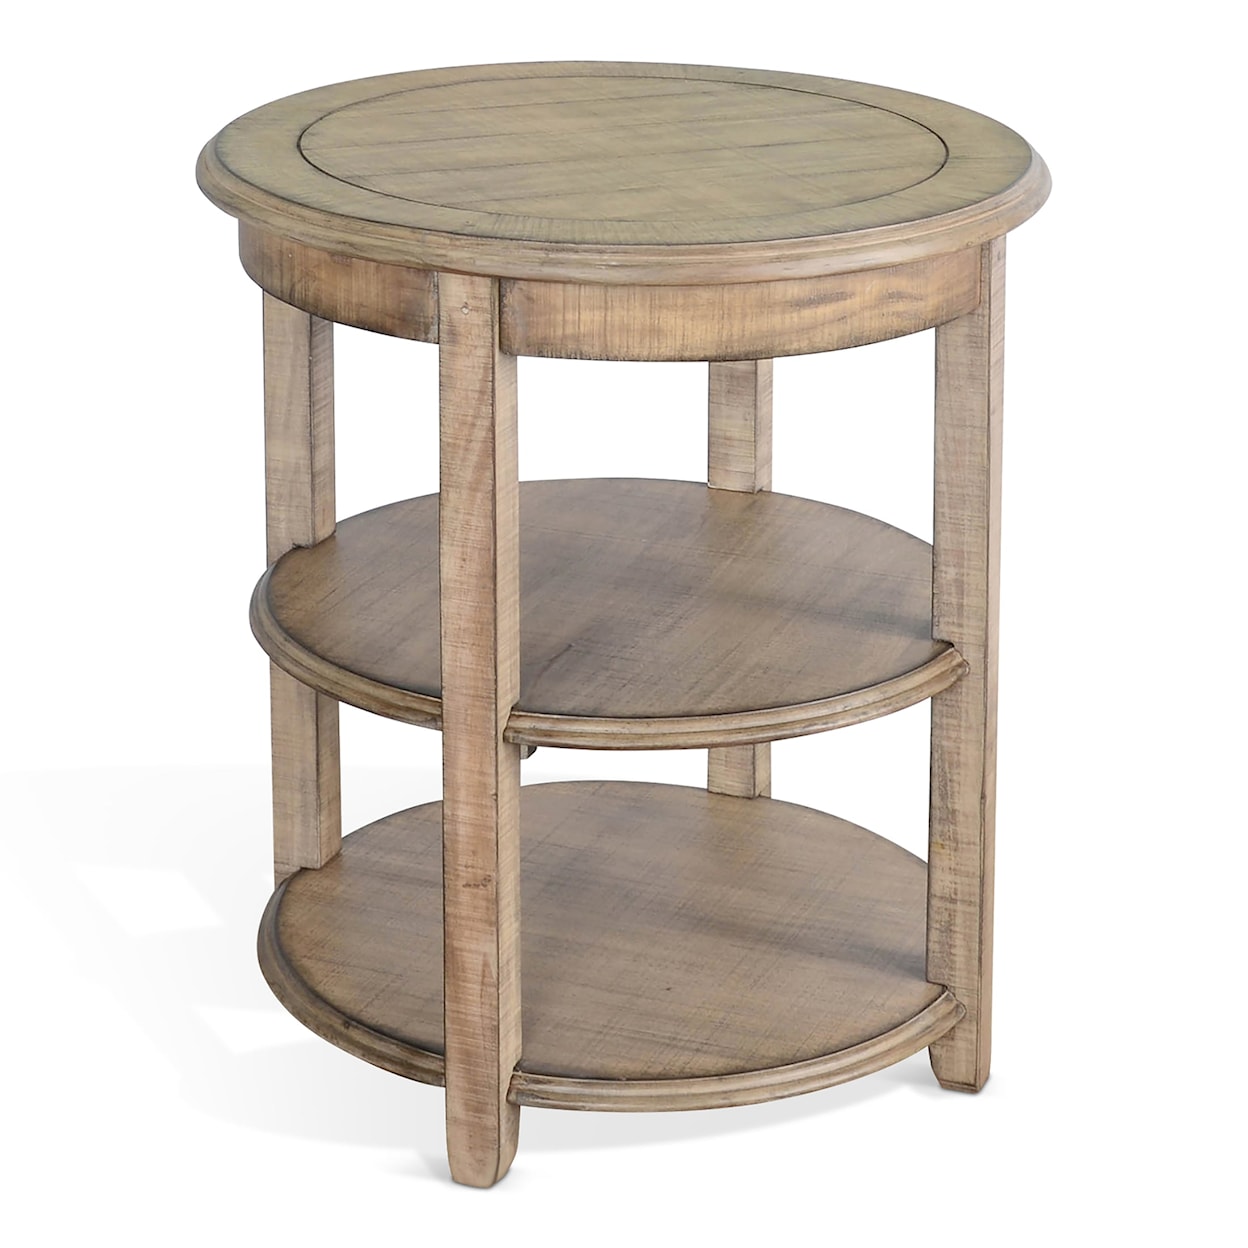 Sunny Designs Marina Round Side Table